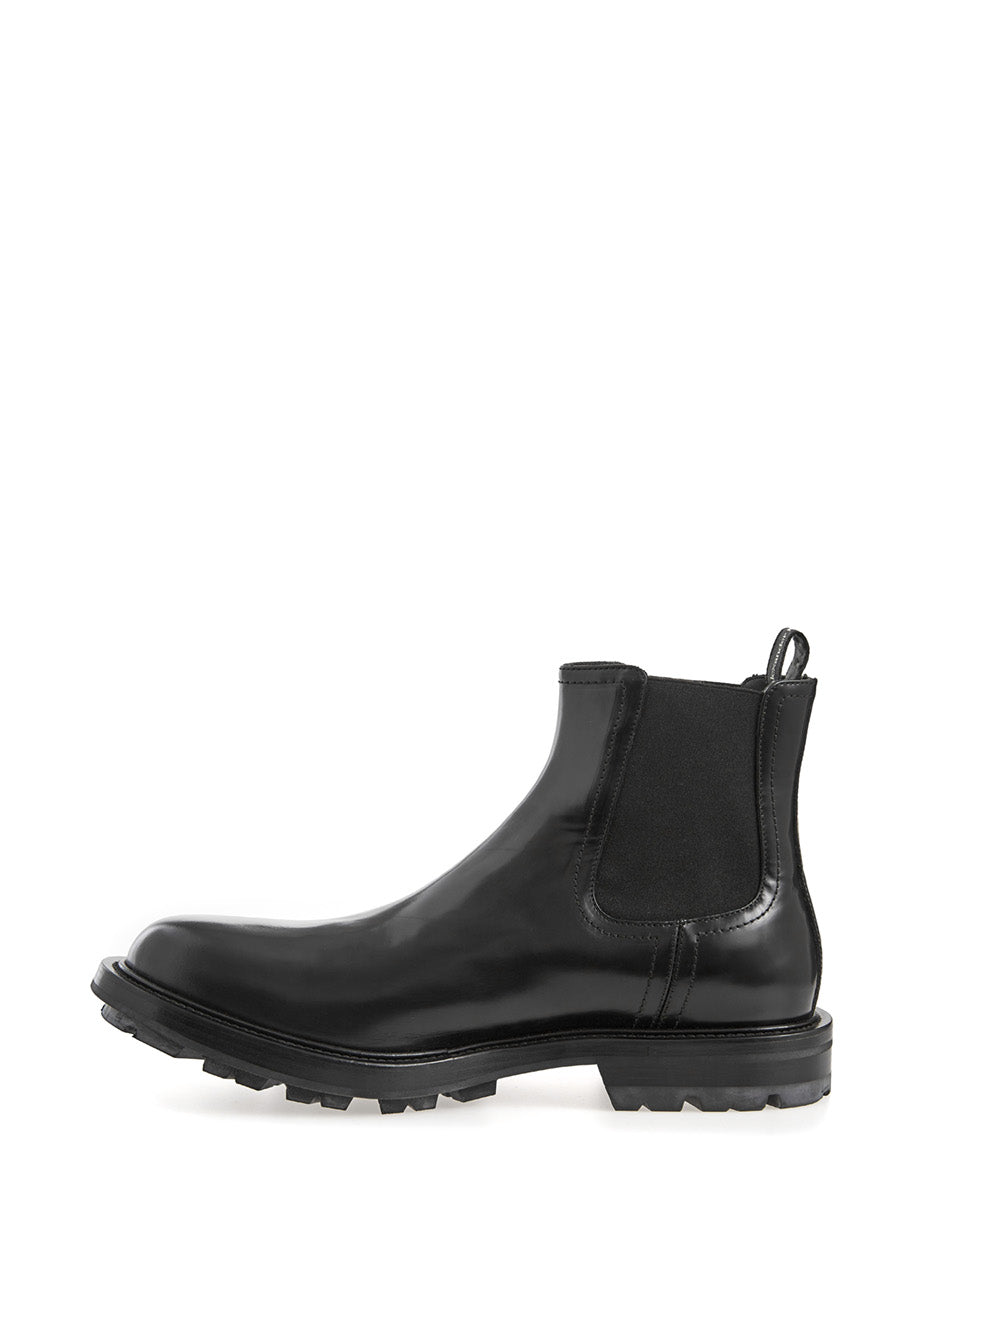 Alexander McQueen Black Leather Chelsea boots with Patent Leather Detail